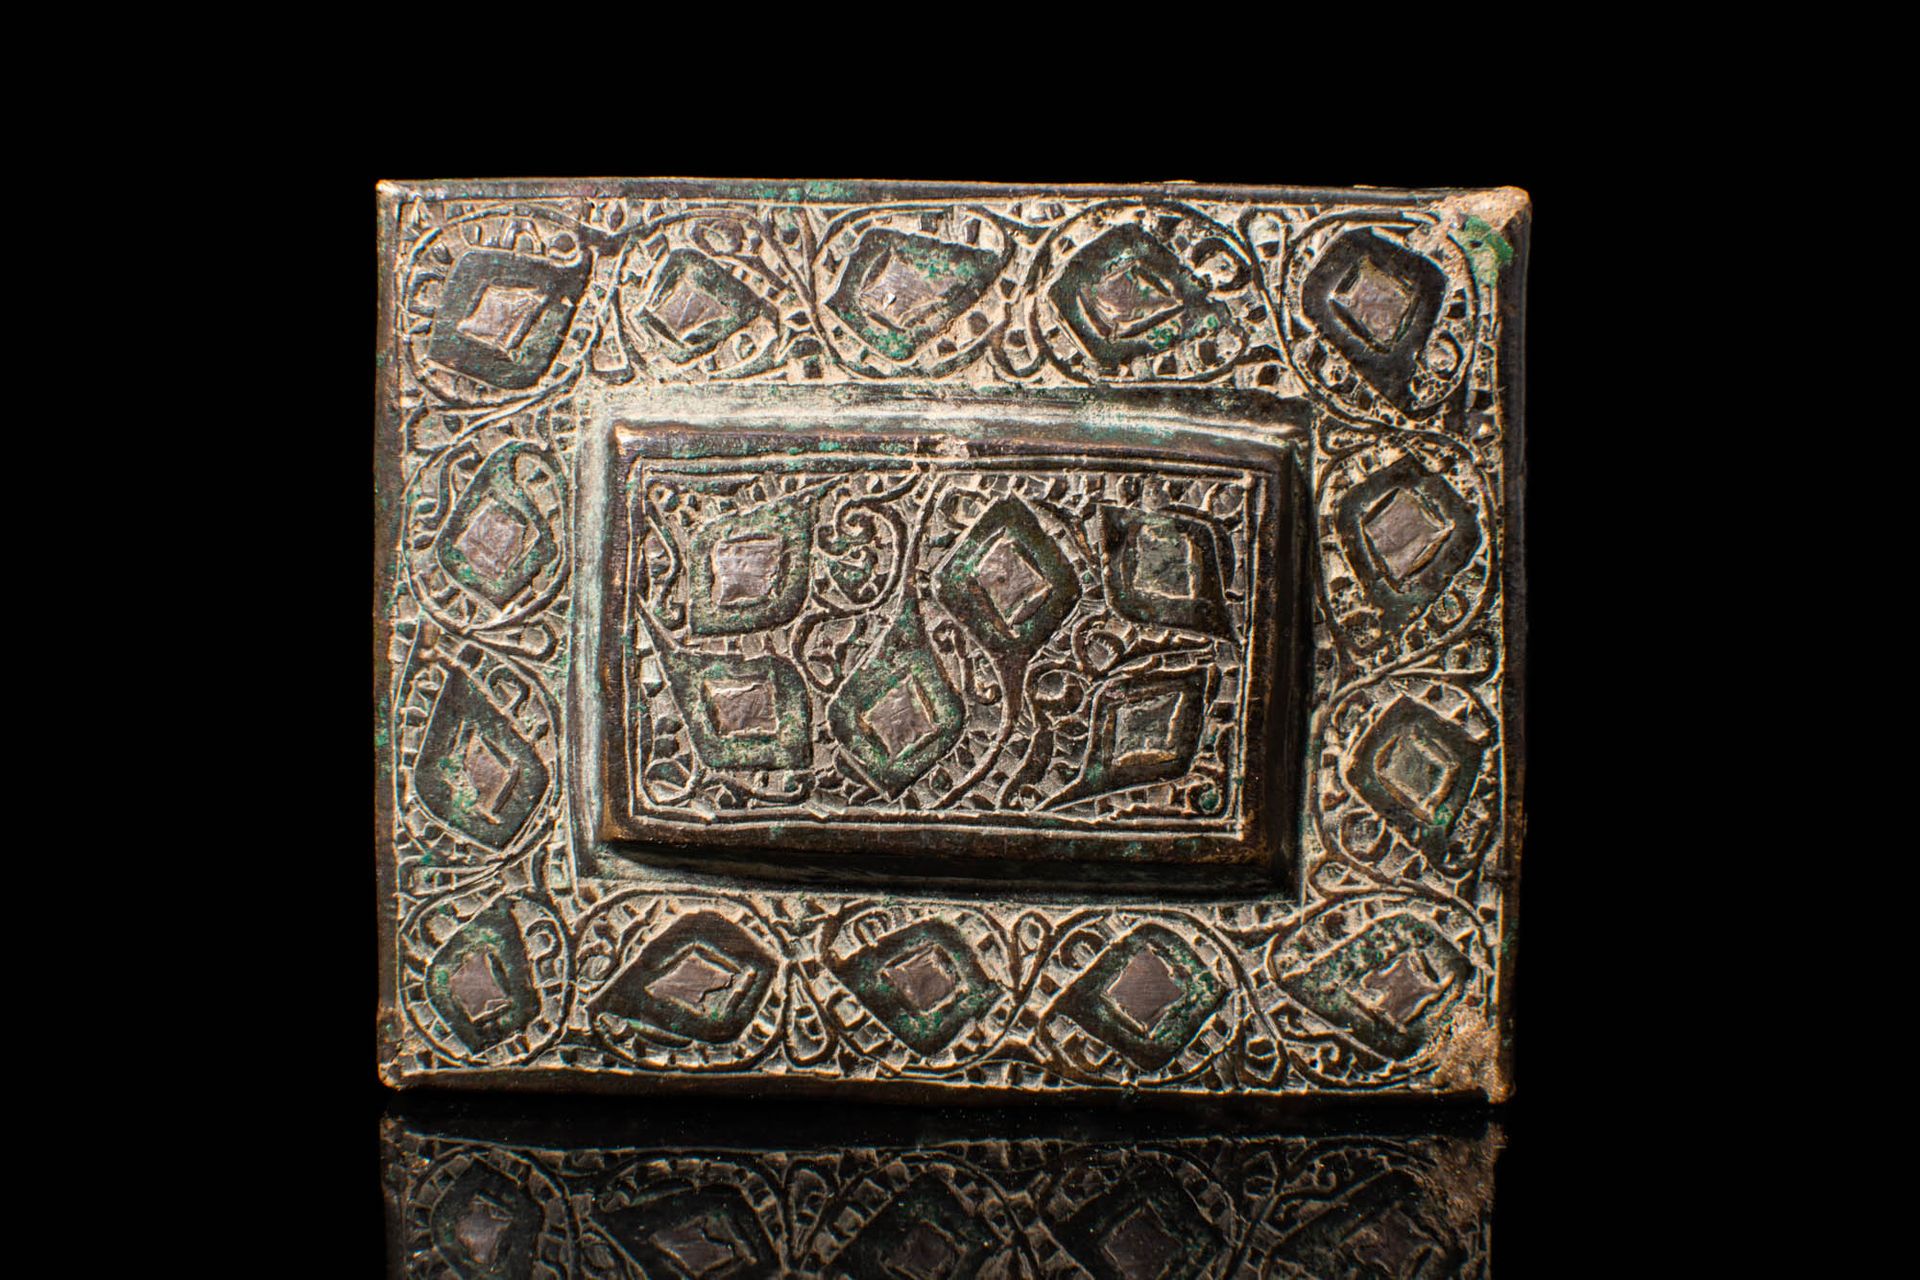 SAFAVID BOX COVER DECORATED WITH FLORAL MOTIFS Ca. AD 1500 - 1600.
Couvercle de &hellip;